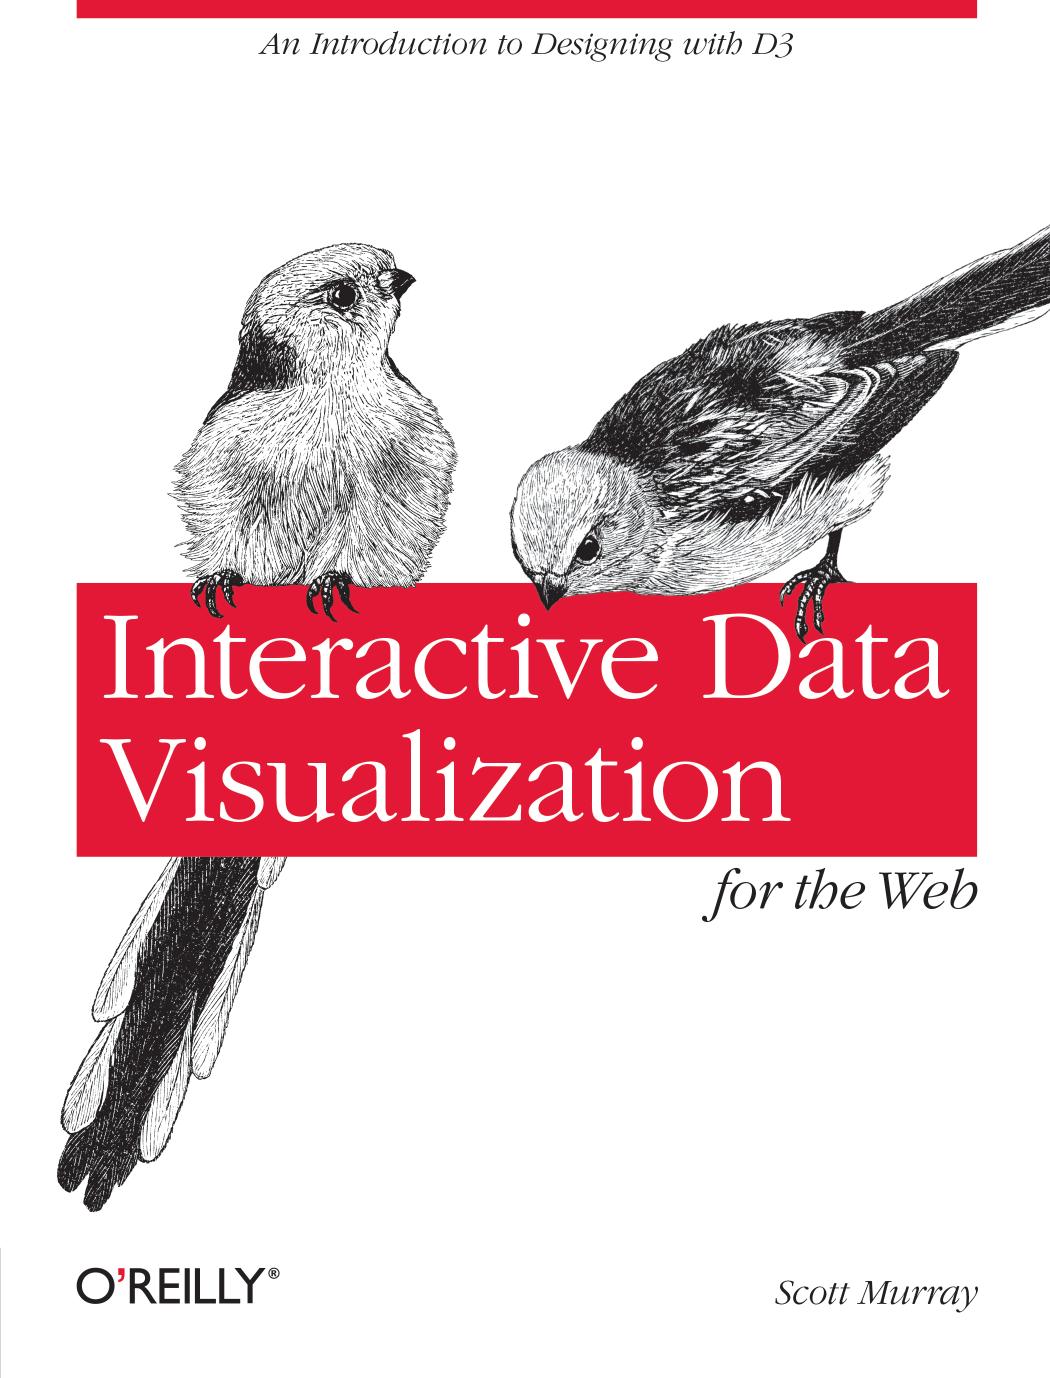 Interactive Data Visualization for the Web by Scott Murray